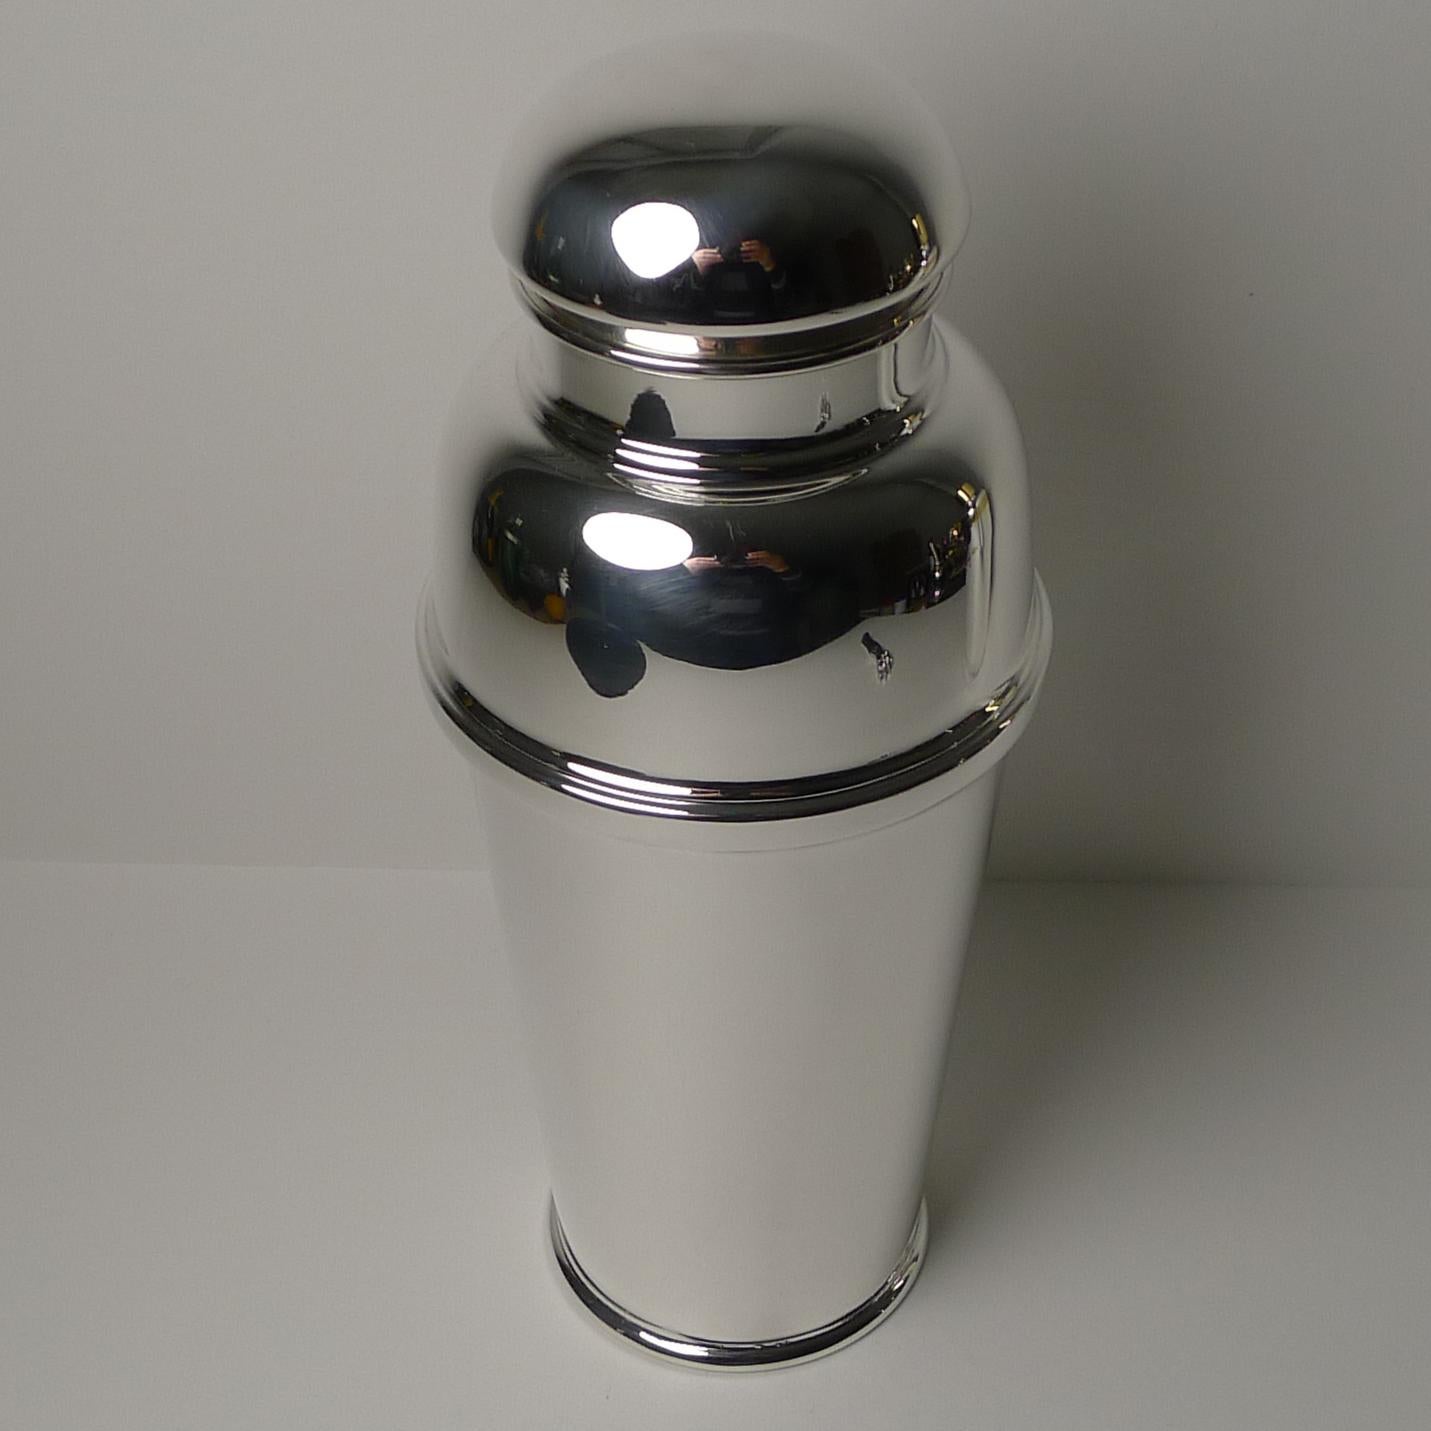 A most unusual and impressive cocktail shaker, just back from our silversmith's workshop where it has been professionally cleaned and polished, restored to it's former glory.

A two-piece shaker, the lid lifts off and reveals a fixed straining